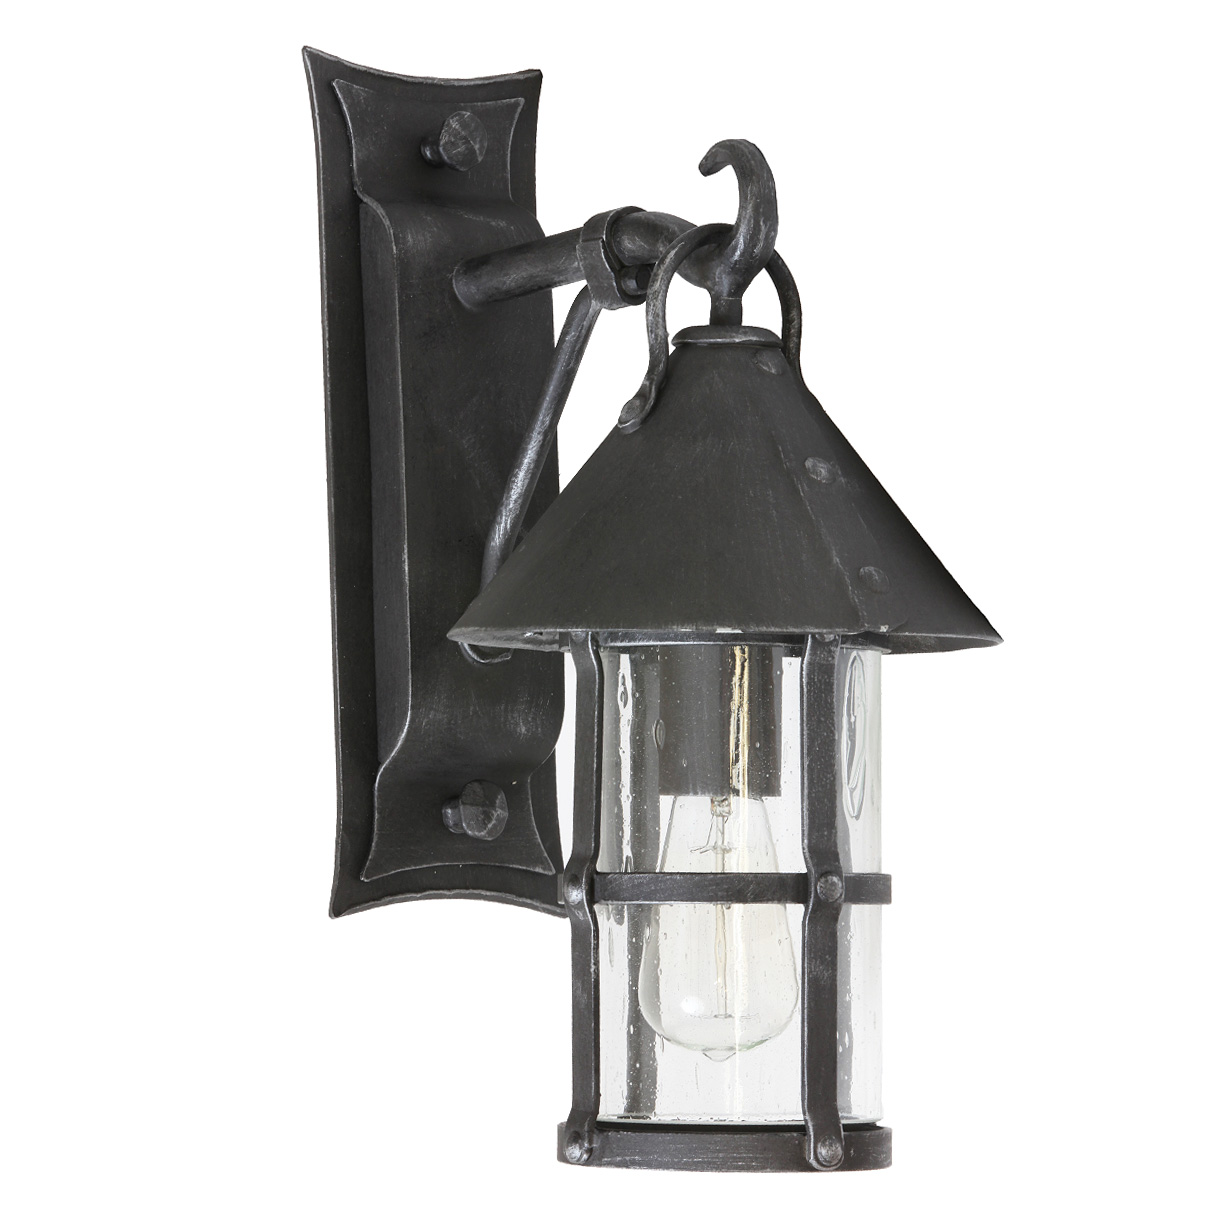 Medieval Wrought Iron Outdoor Sconce WL 3497.3495